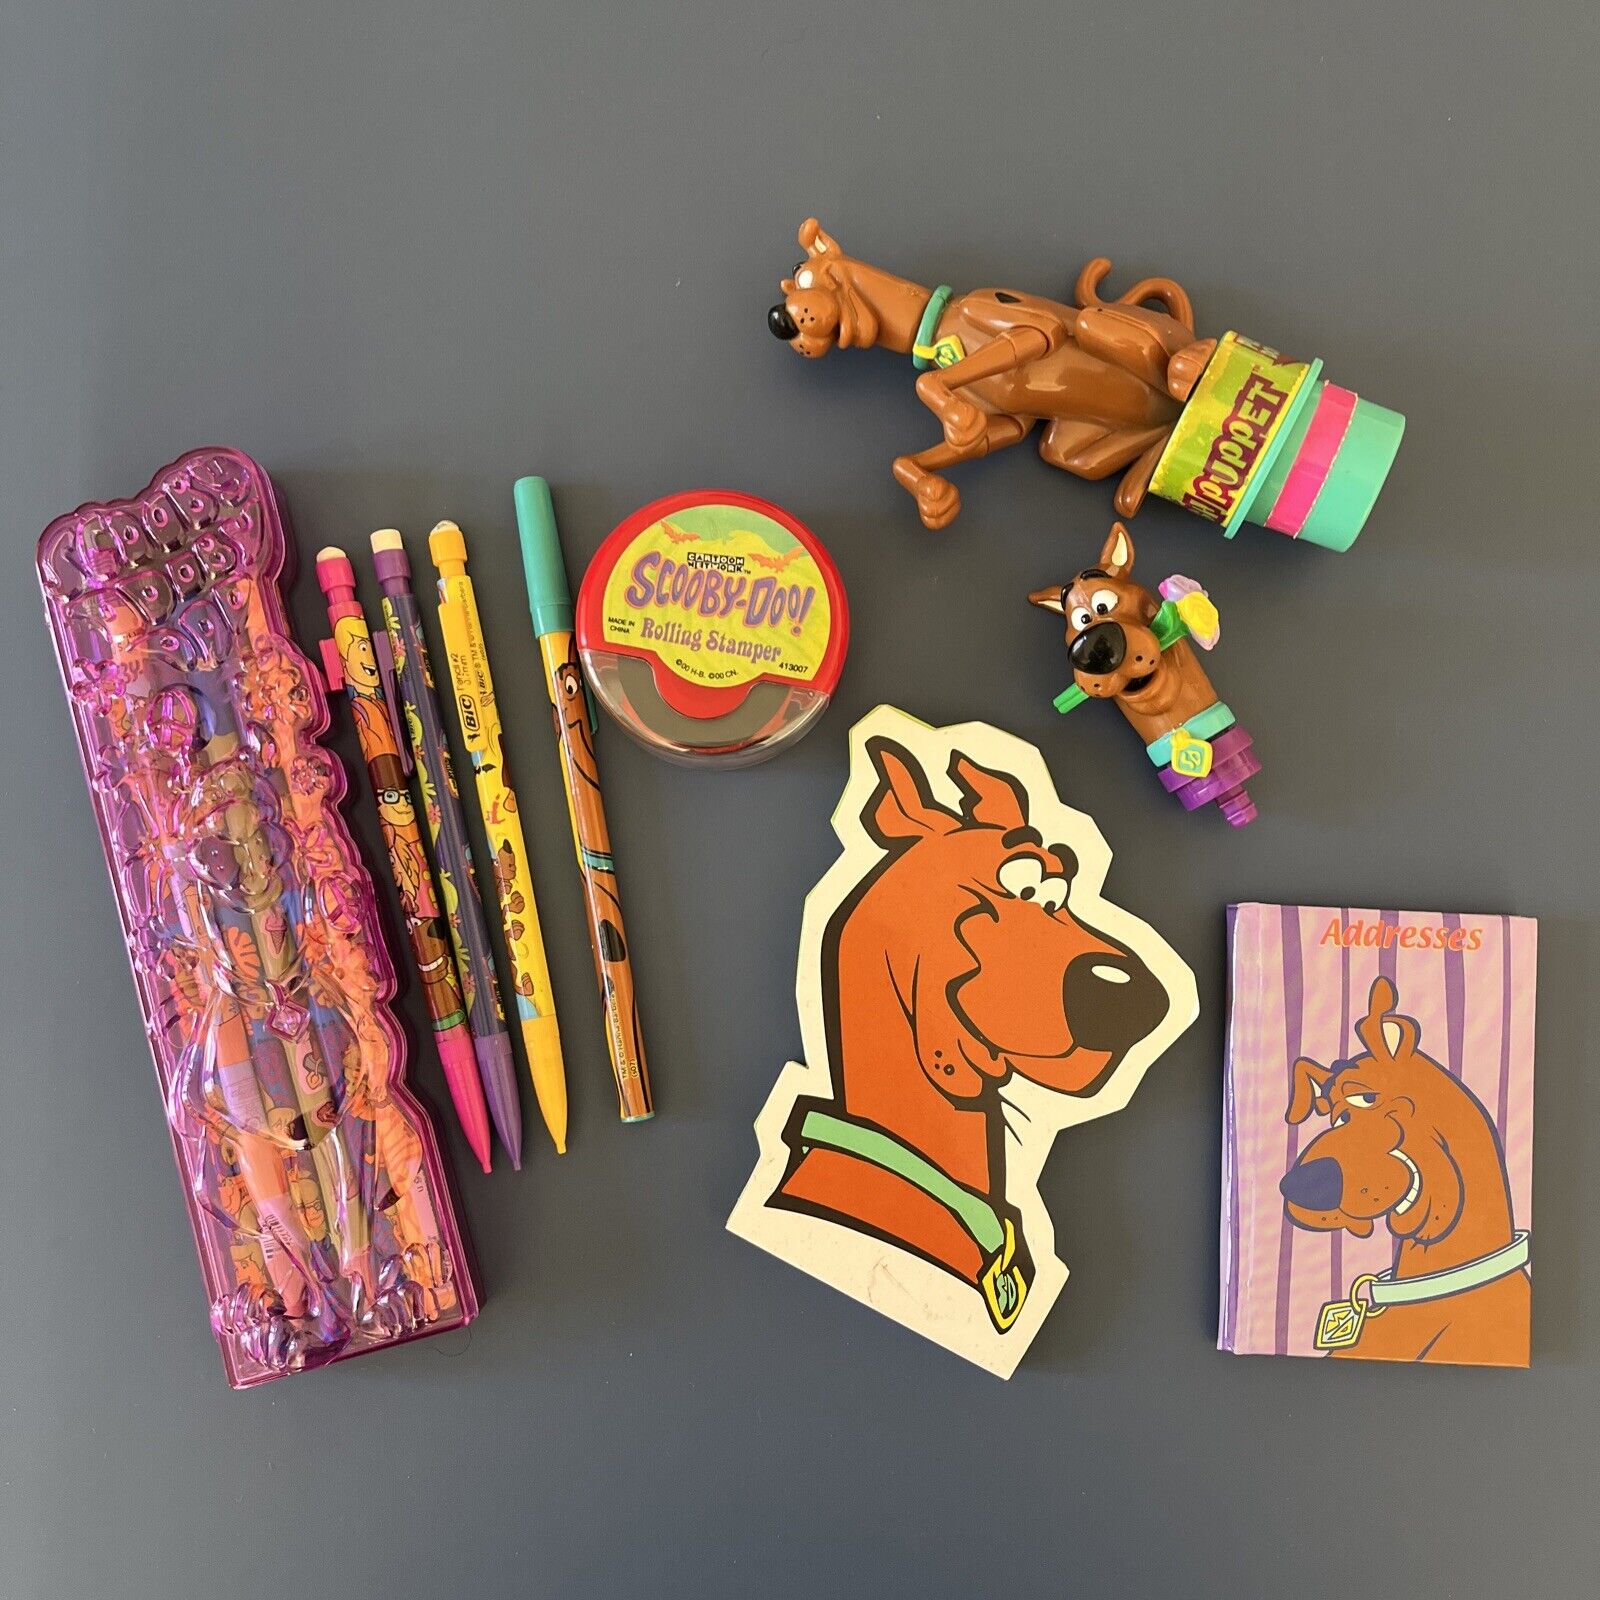 Vintage Mixed Lot of Scooby Doo Memo Pad Pencil Stamper Address Book Push Puppet